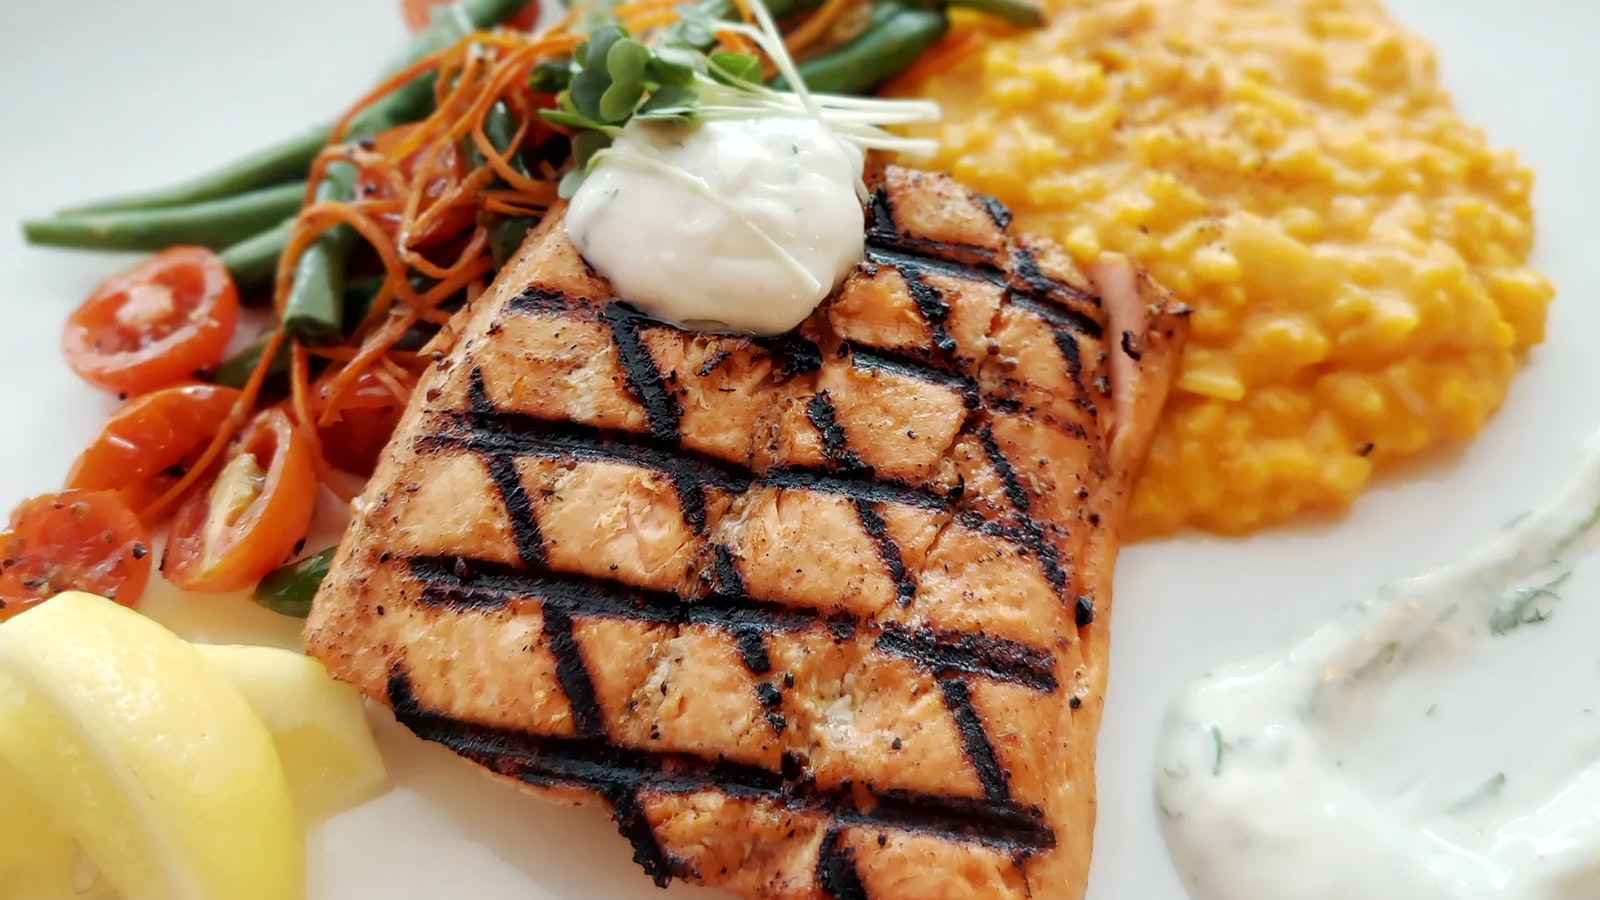 Grilled salmon.